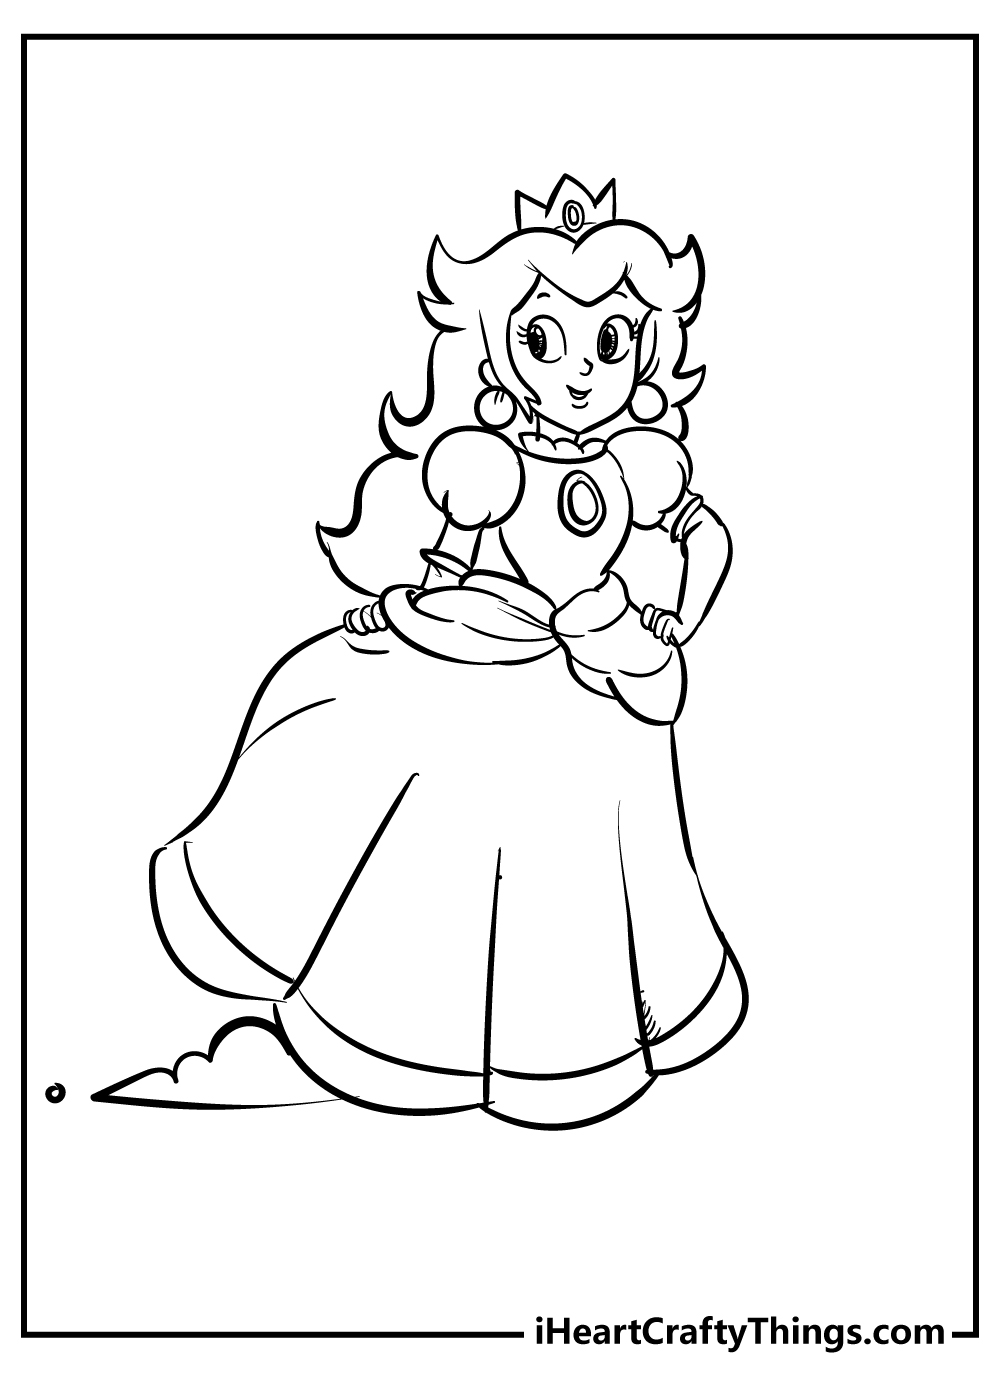 Princess Peach Coloring Pages for Kids 66